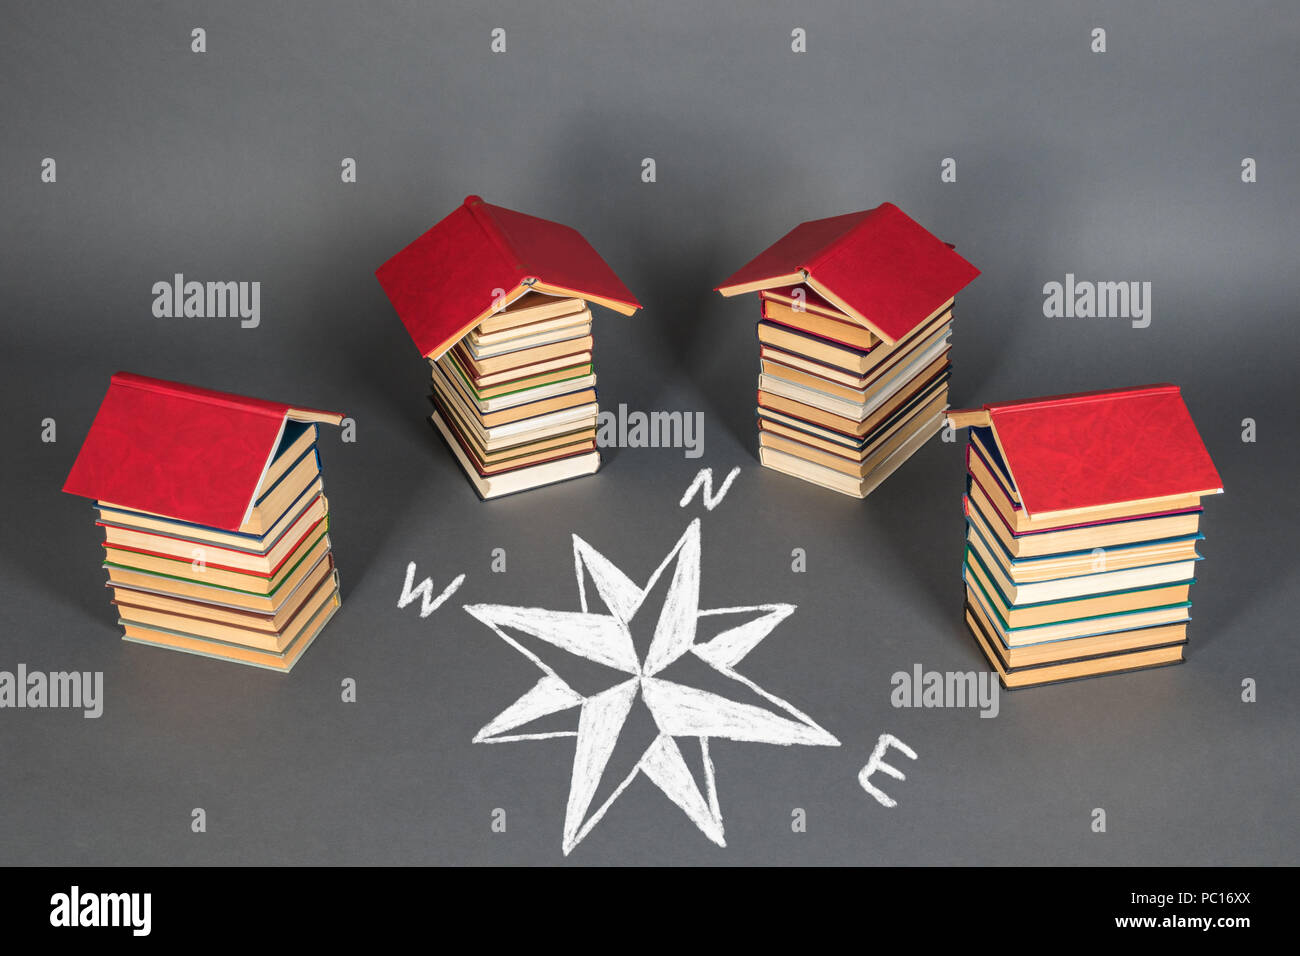 Education concept. Books as a basis for choosing prospects Stock Photo